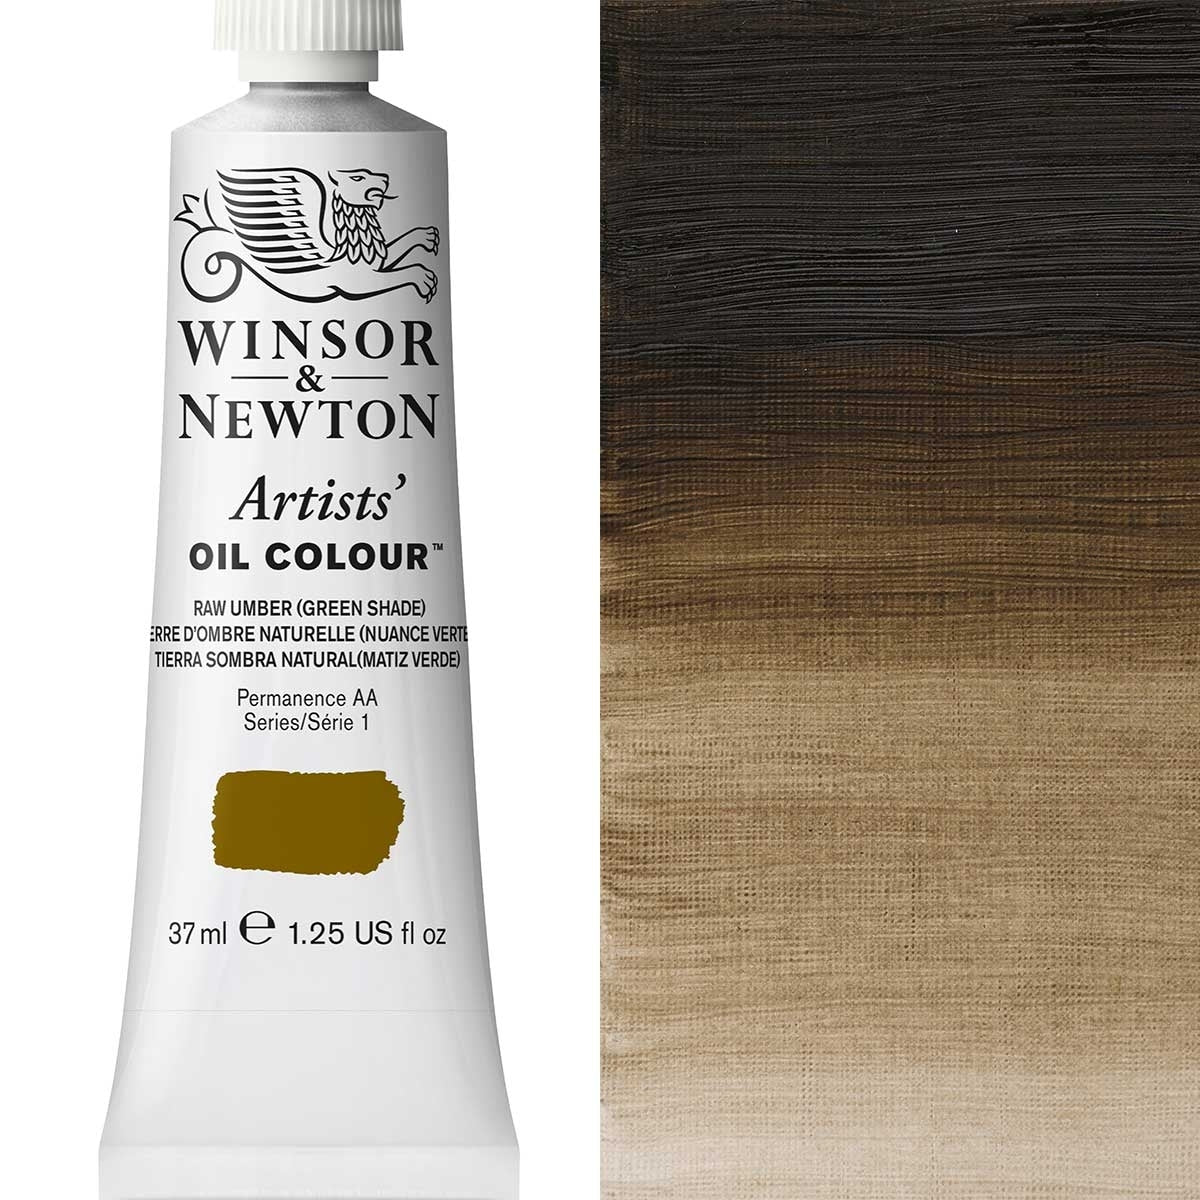 Winsor and Newton - Artists' Oil Colour - 37ml - Raw Umber Green Shade